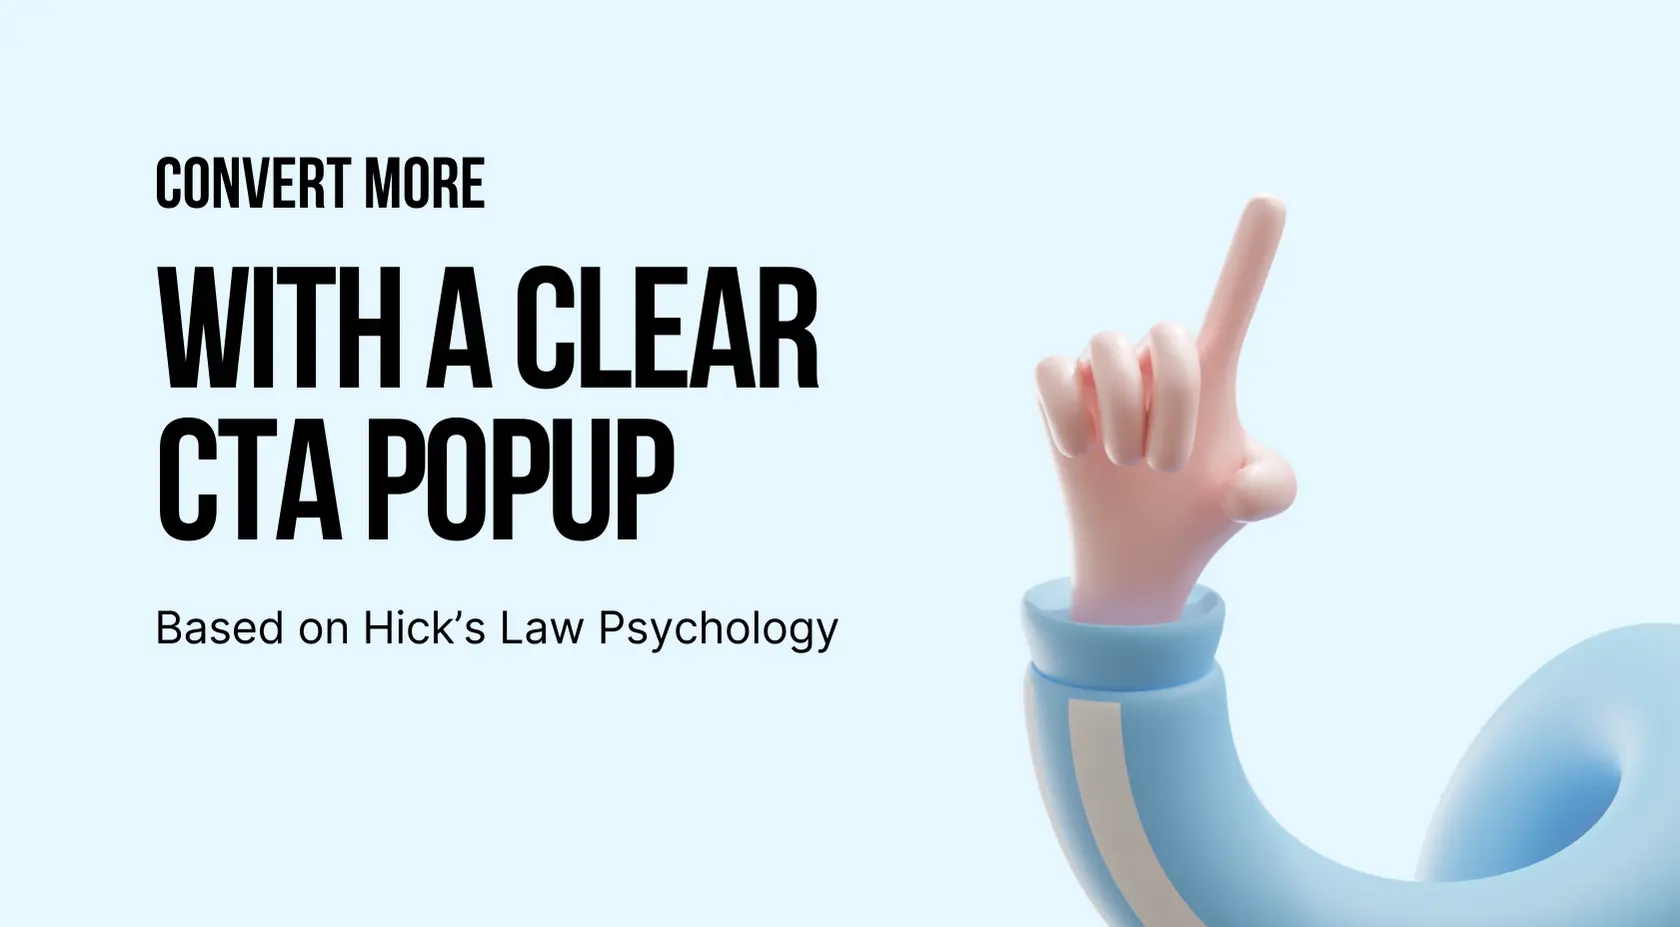 A Clear CTA Popup Based on Hick's Law Psychology to Fire Up Sales